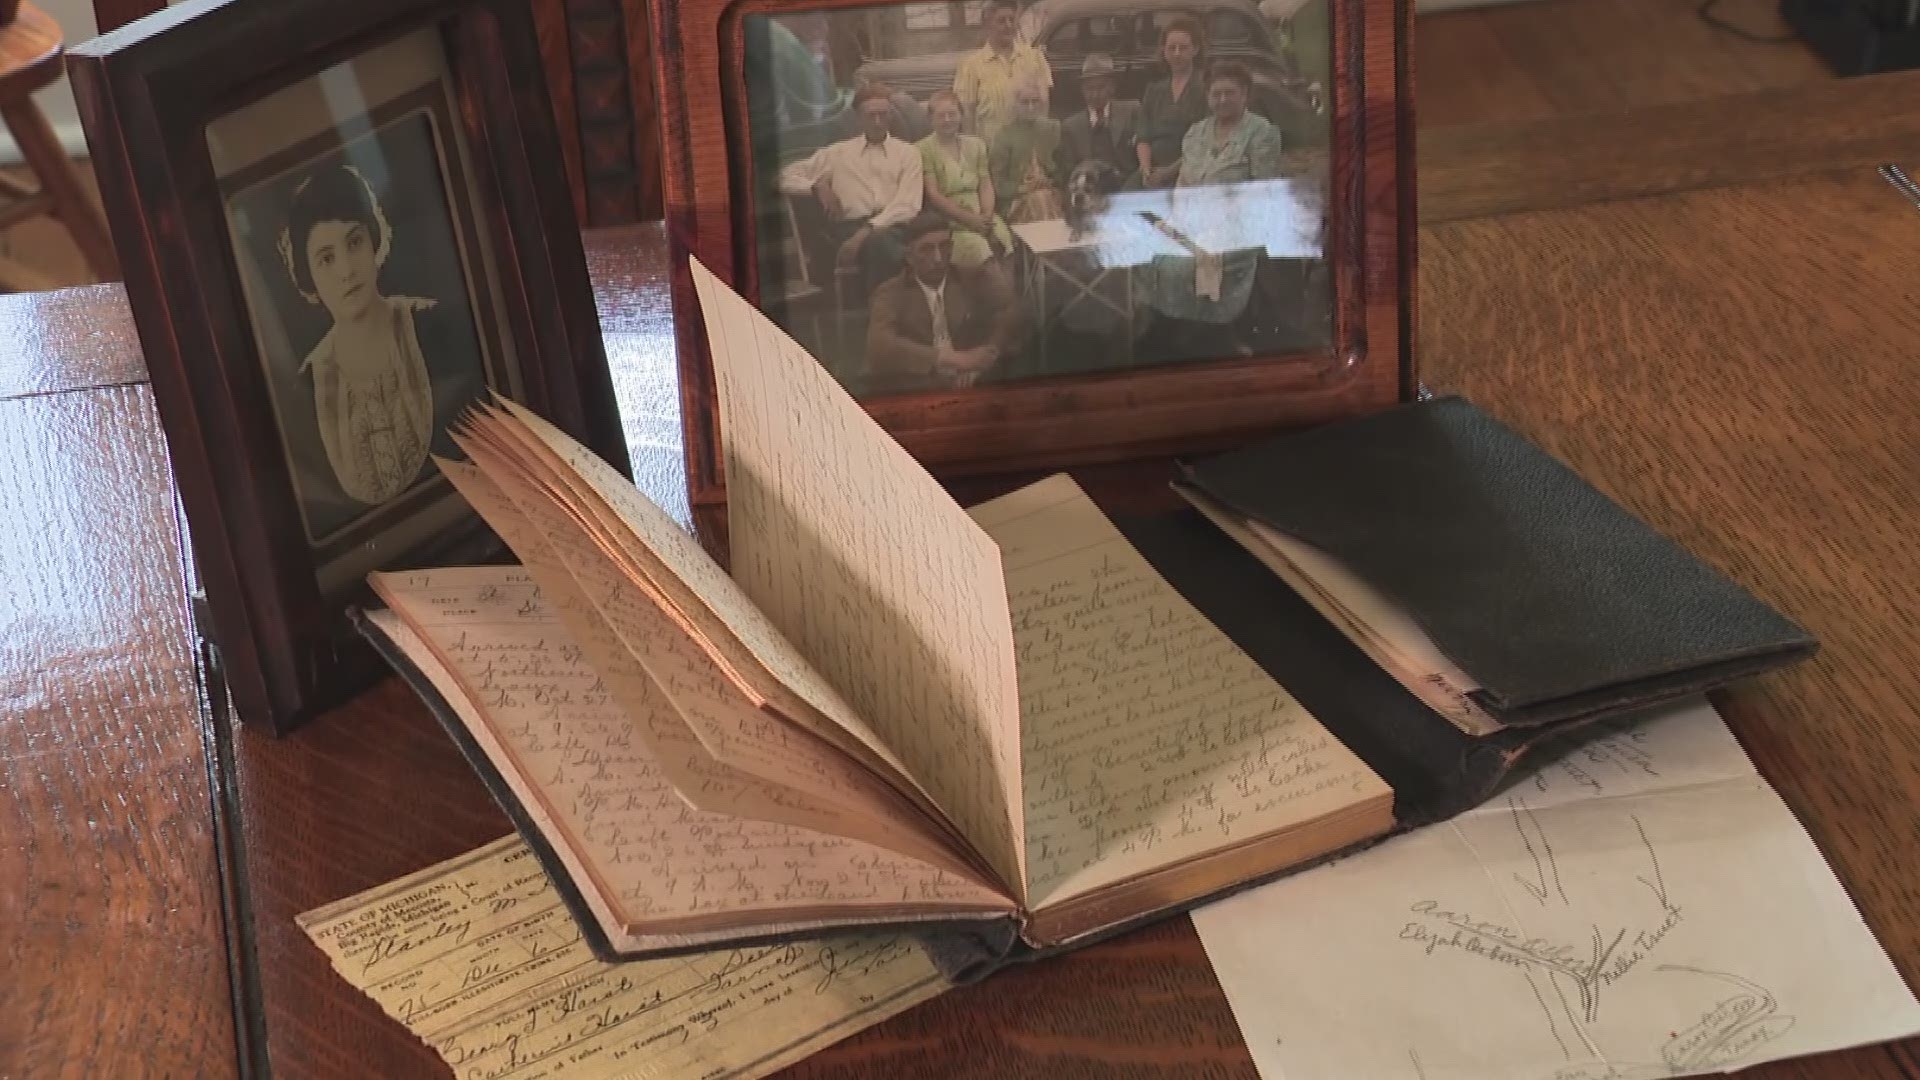 Terry Peck has been immersed in family history ever since she found out that an old travel journal found at the Plainwell Home Depot was part of her family lineage.